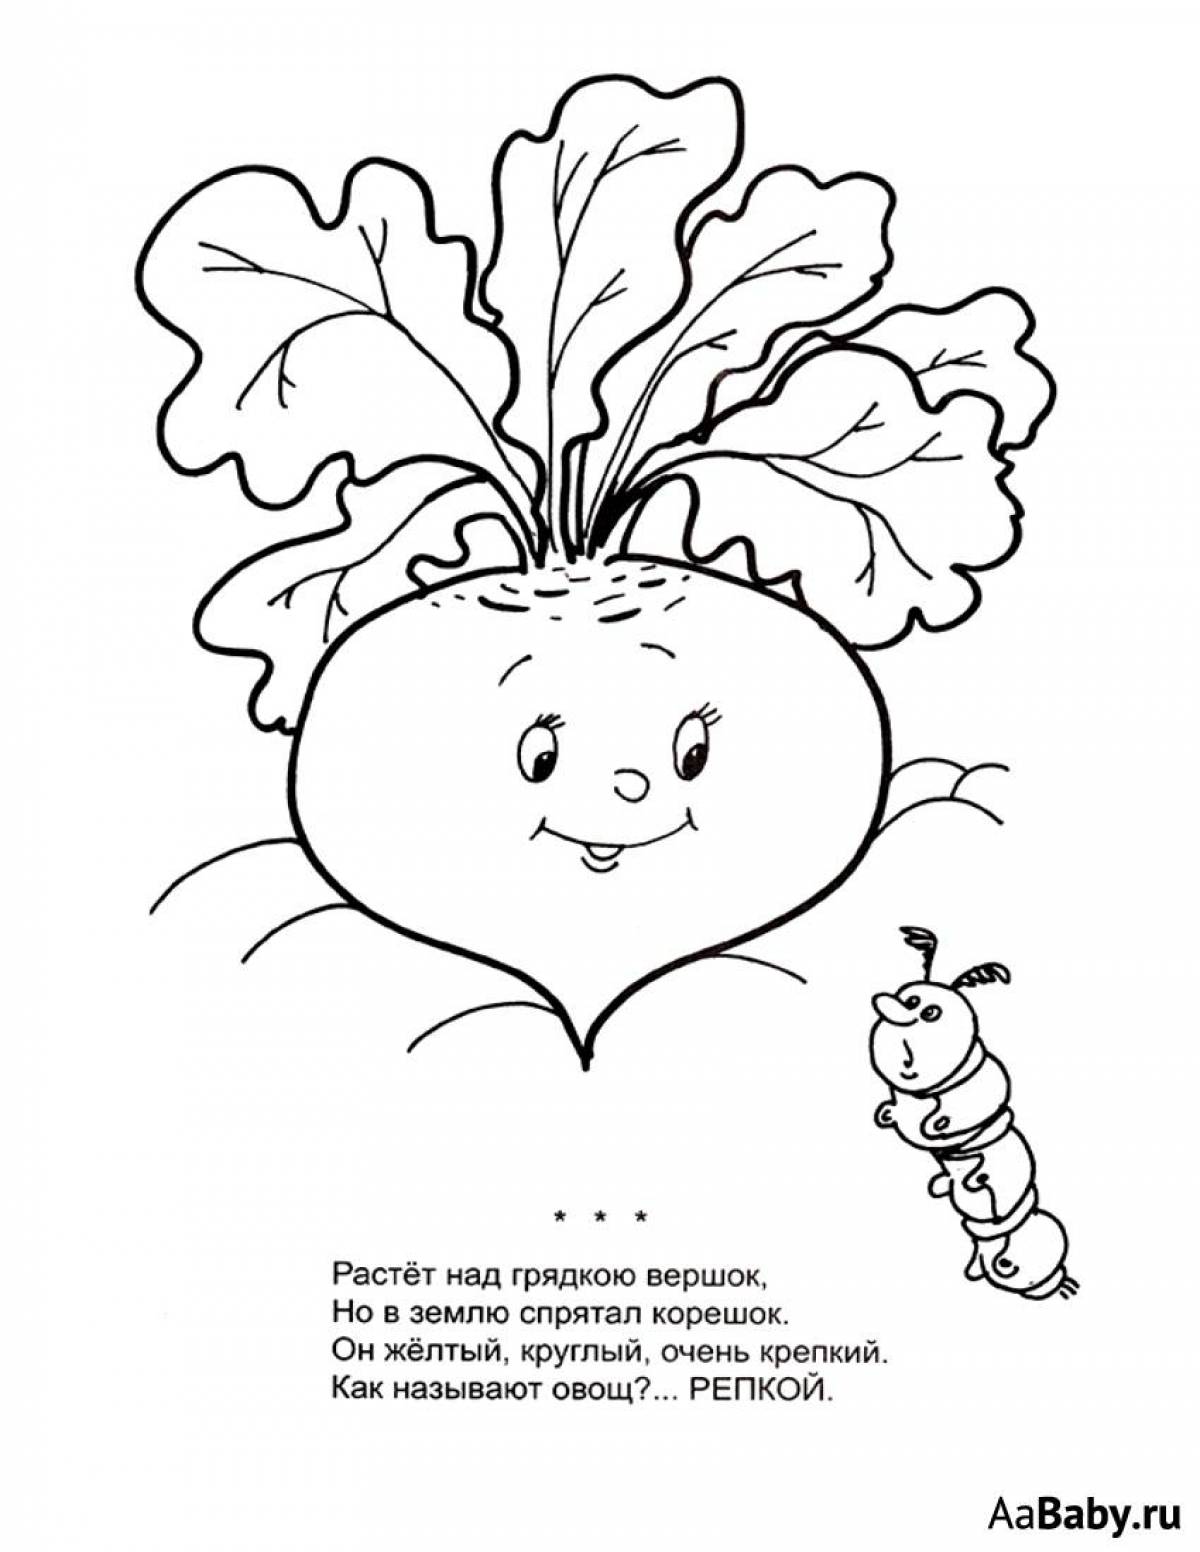 Fabulous turnip coloring page